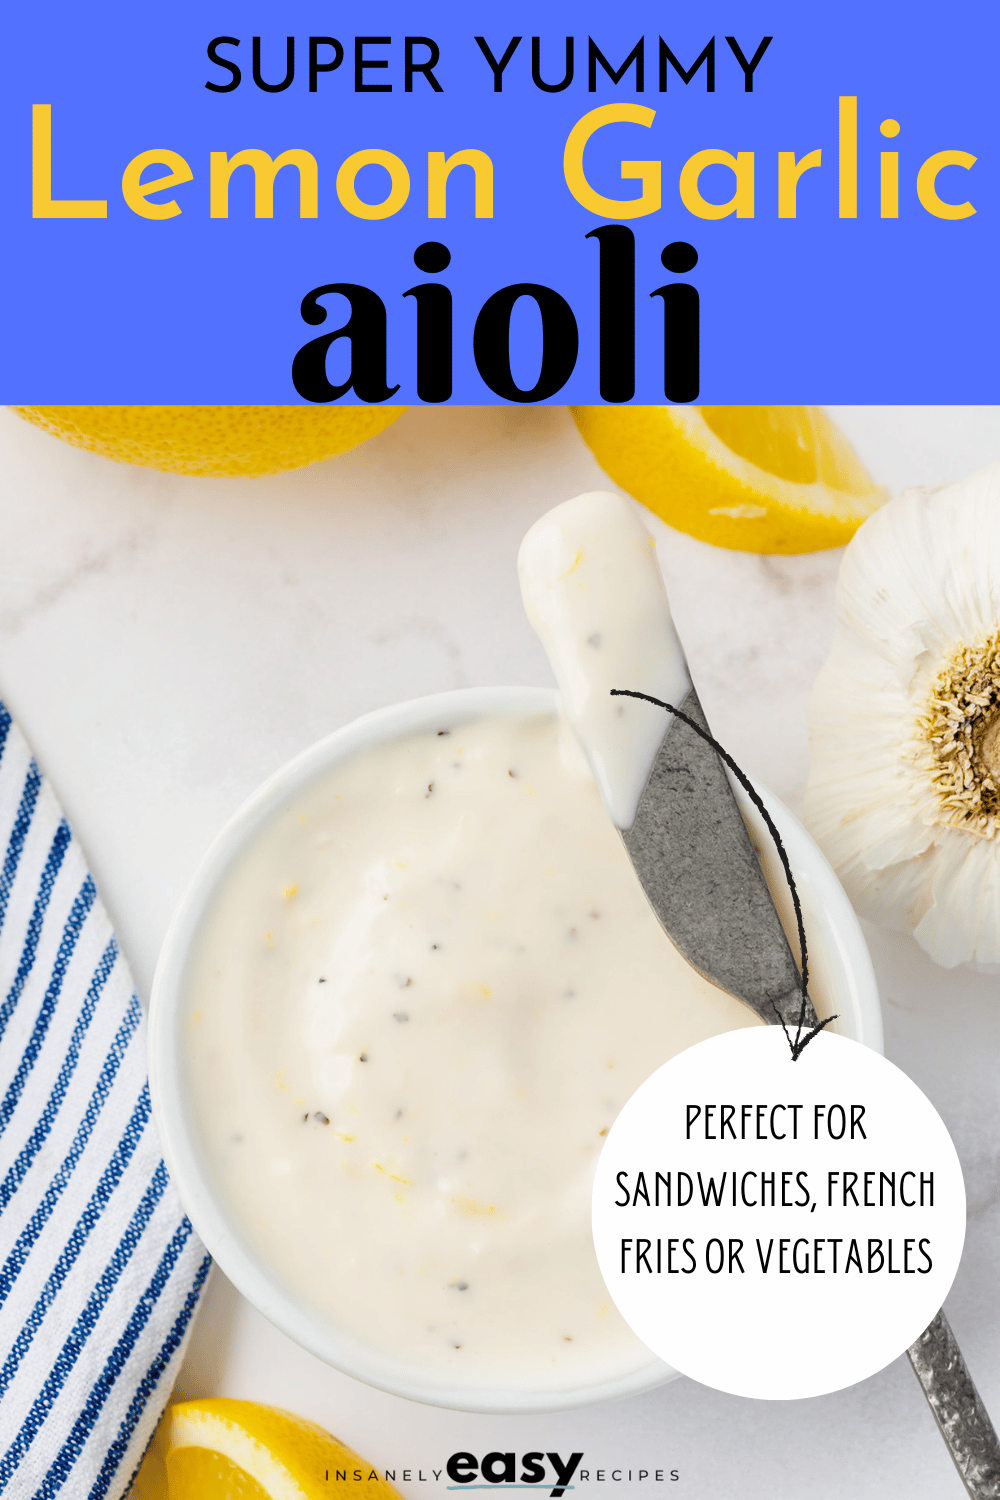 a small bowl of creamy aioli on a counter with lemon slices. Text at top of image says "super yummy lemon garlic aioli"